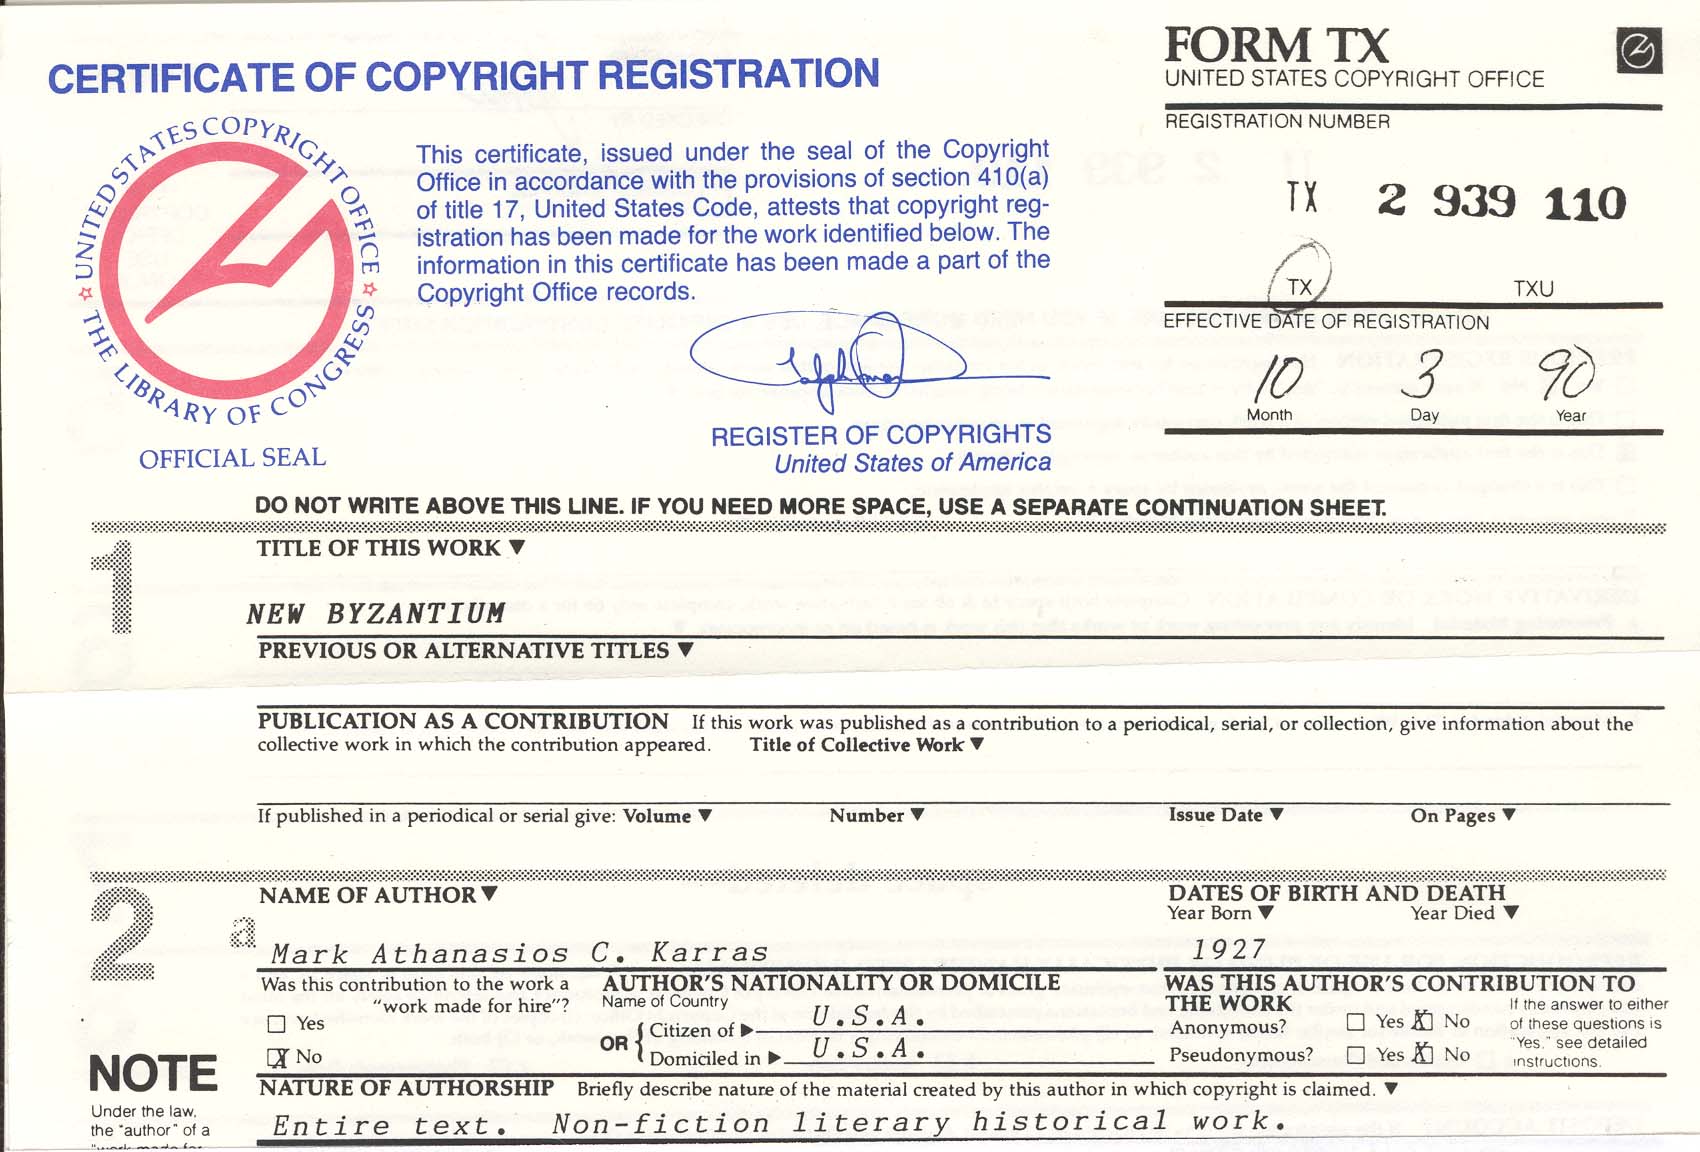 Certificate of Copyright Registration for 'NEW BYZANTIUM' [issued 10/3/90] to Mark Athanasios C. Karras.